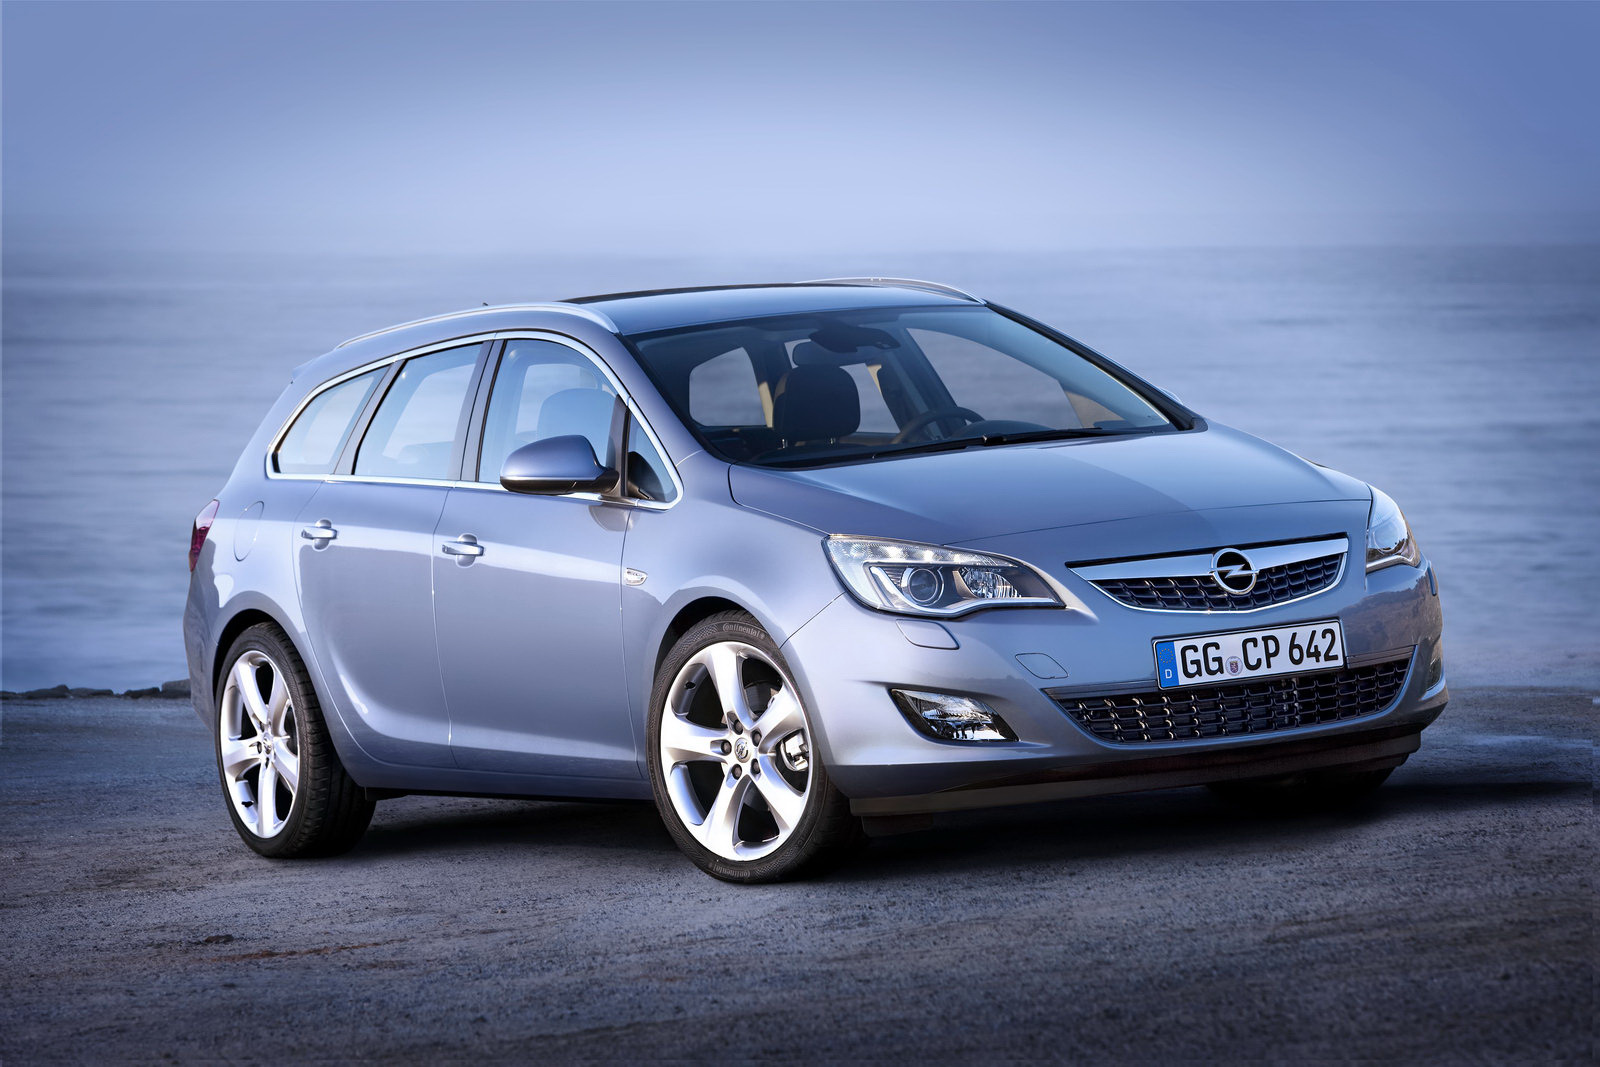 New Opel Astra Sports Tourer Unveiled - Should Buick Bring it to the States?